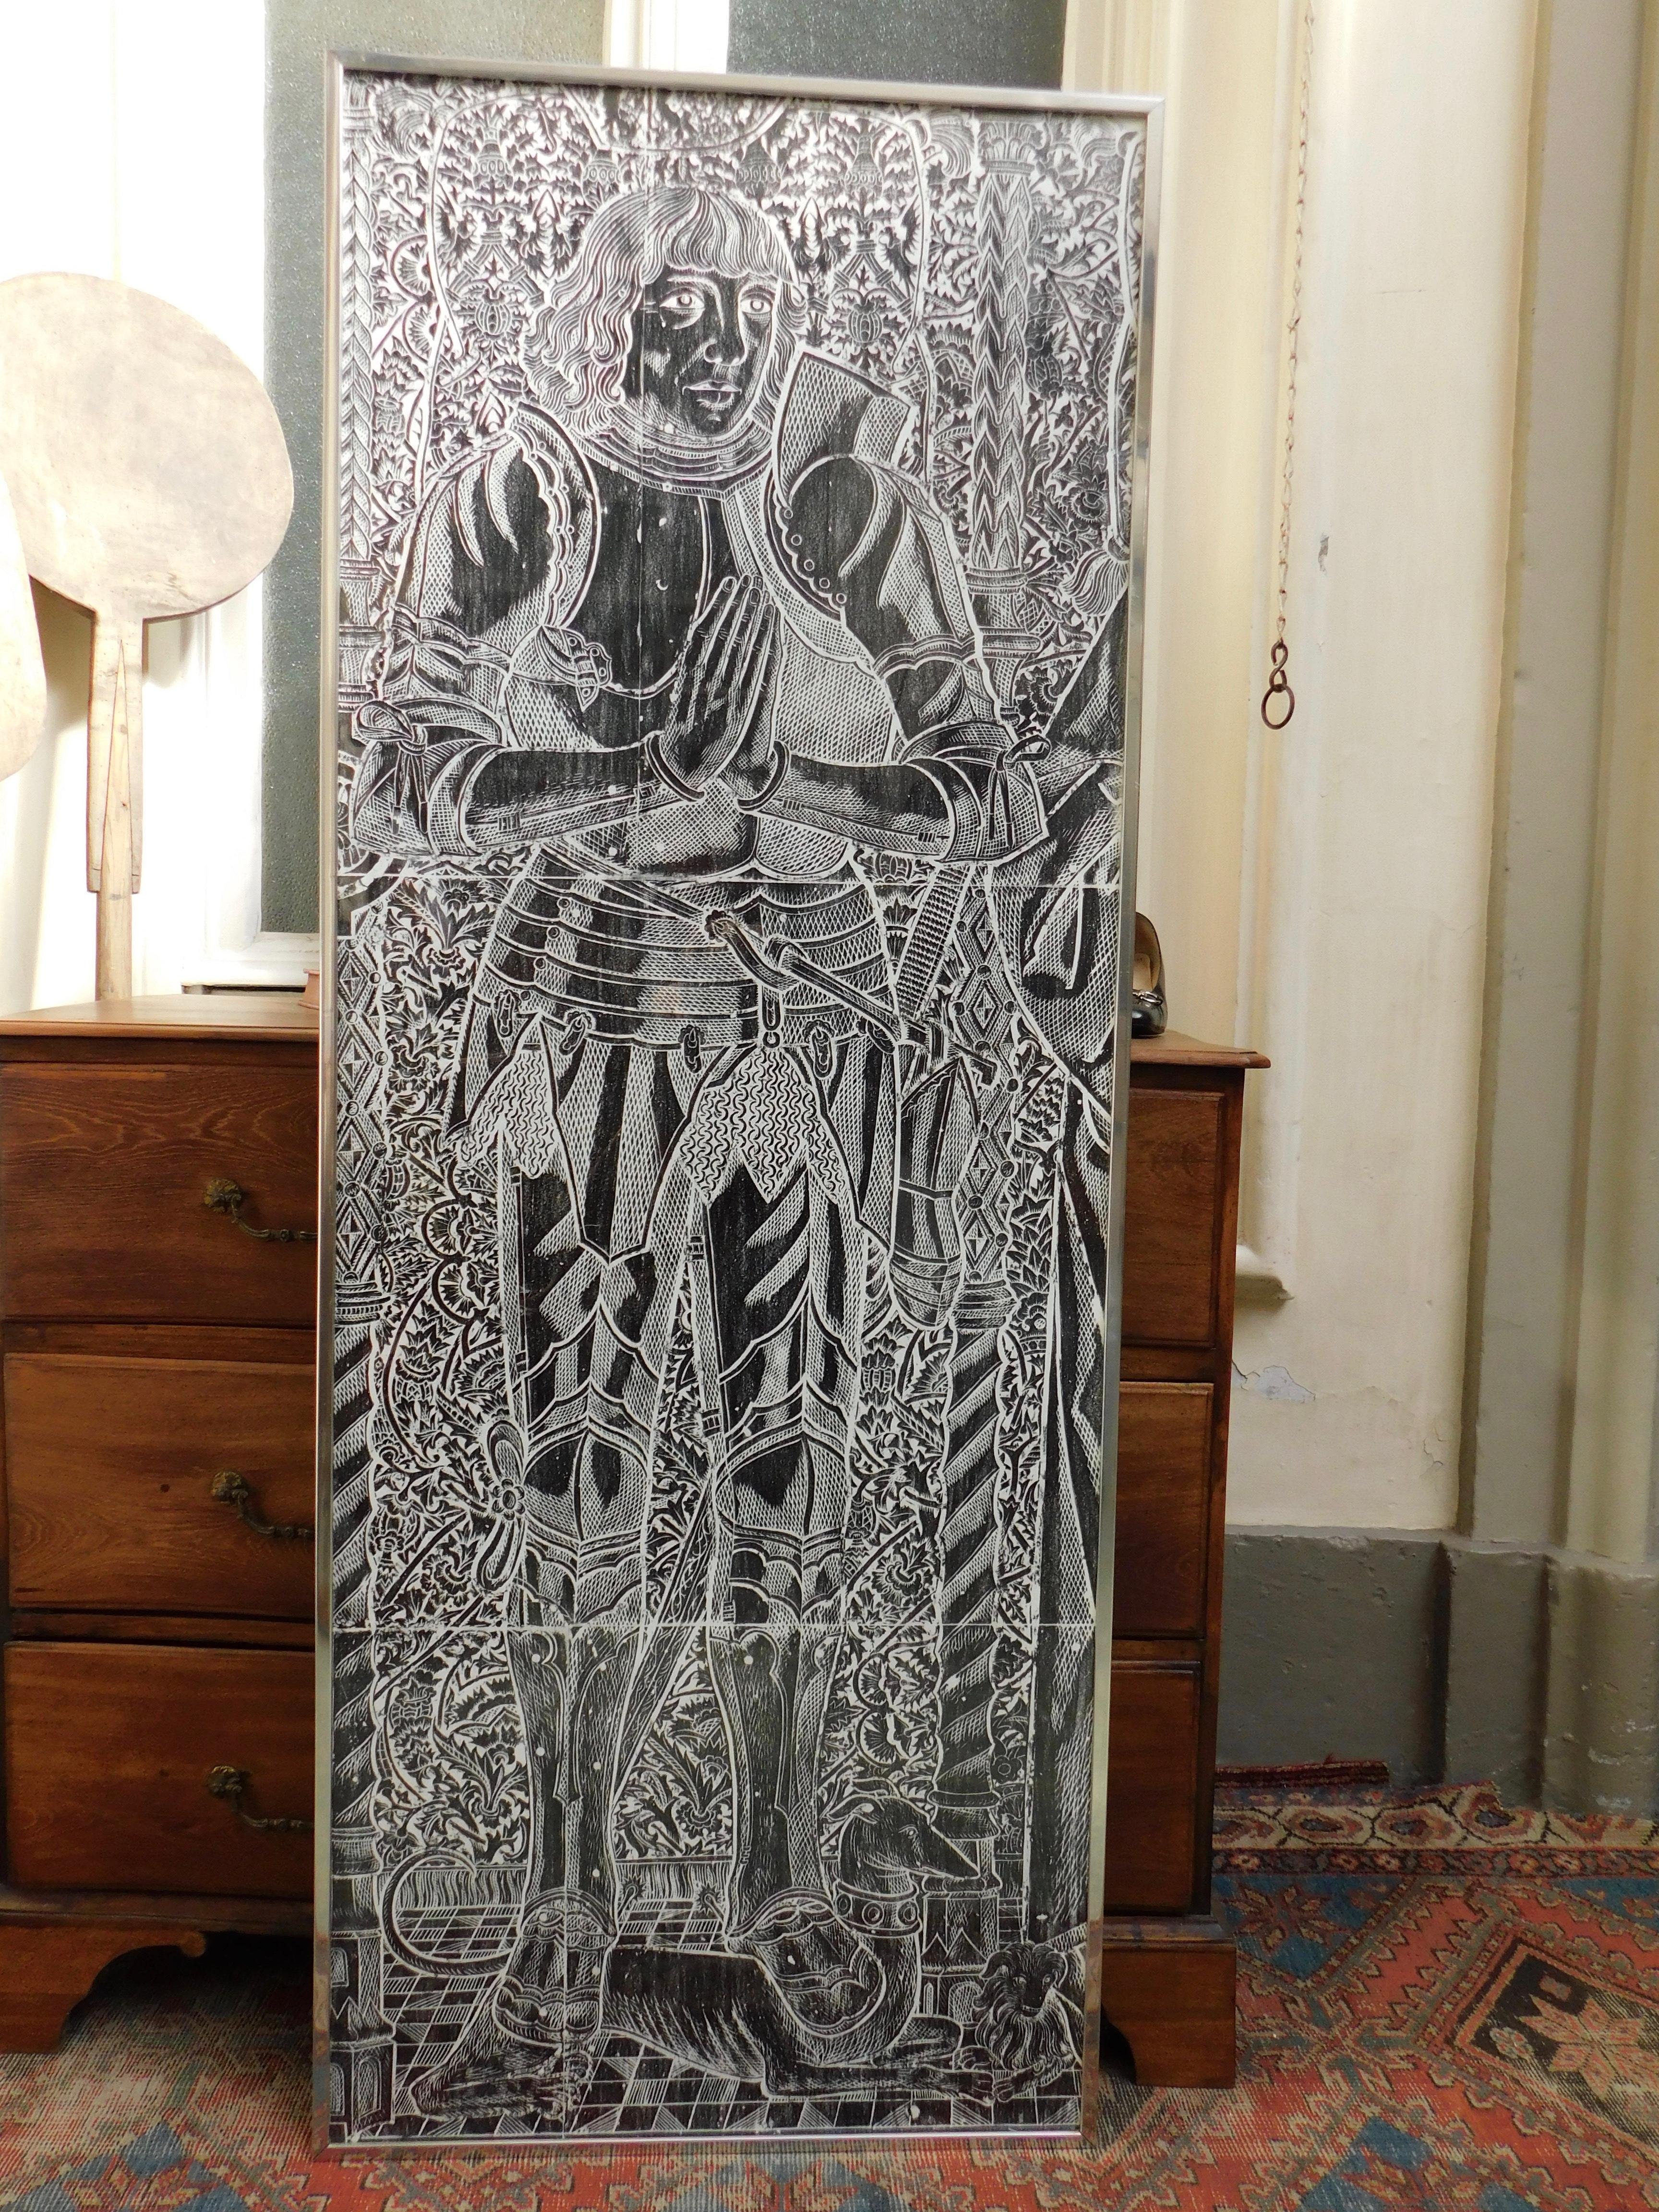 Over 5' tall wax rubbing on paper of a 13th century English tomb carving on stone.
Particularly popular in the 1970s tomb rubbings are made by laying paper on a tomb and rubbing with a flat piece of colored wax. This is a process that is much more